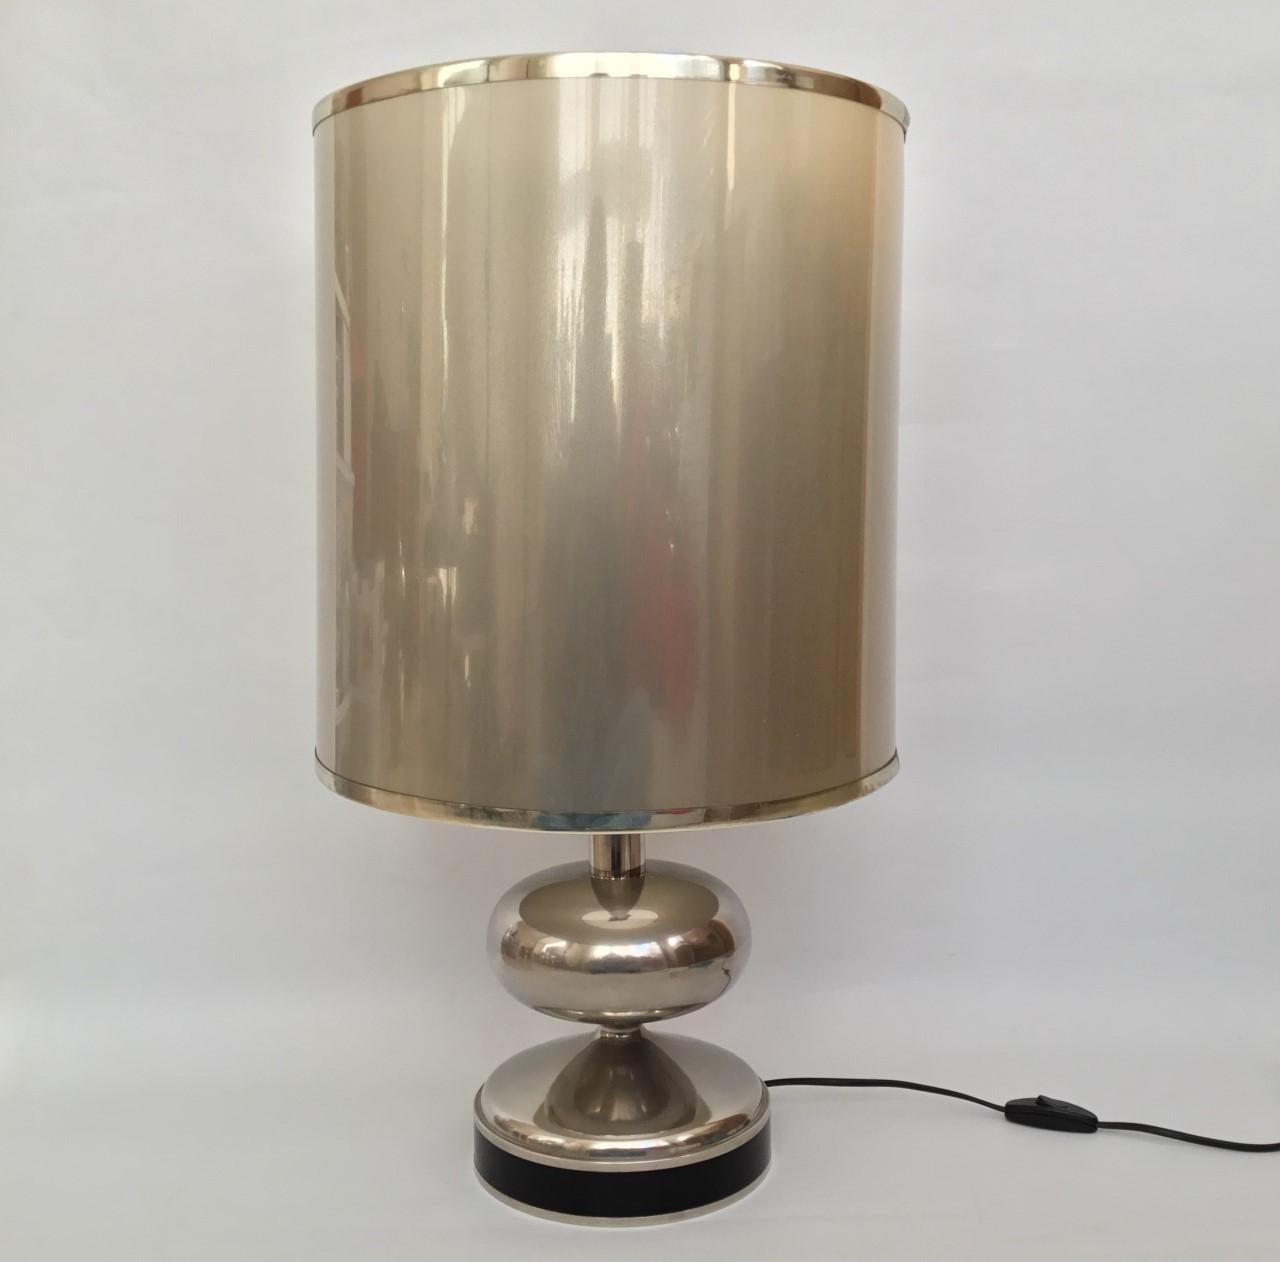 Pair of Midcentury Chromed and Black Enamel Spanish Table Lamps, 1970s For Sale 4